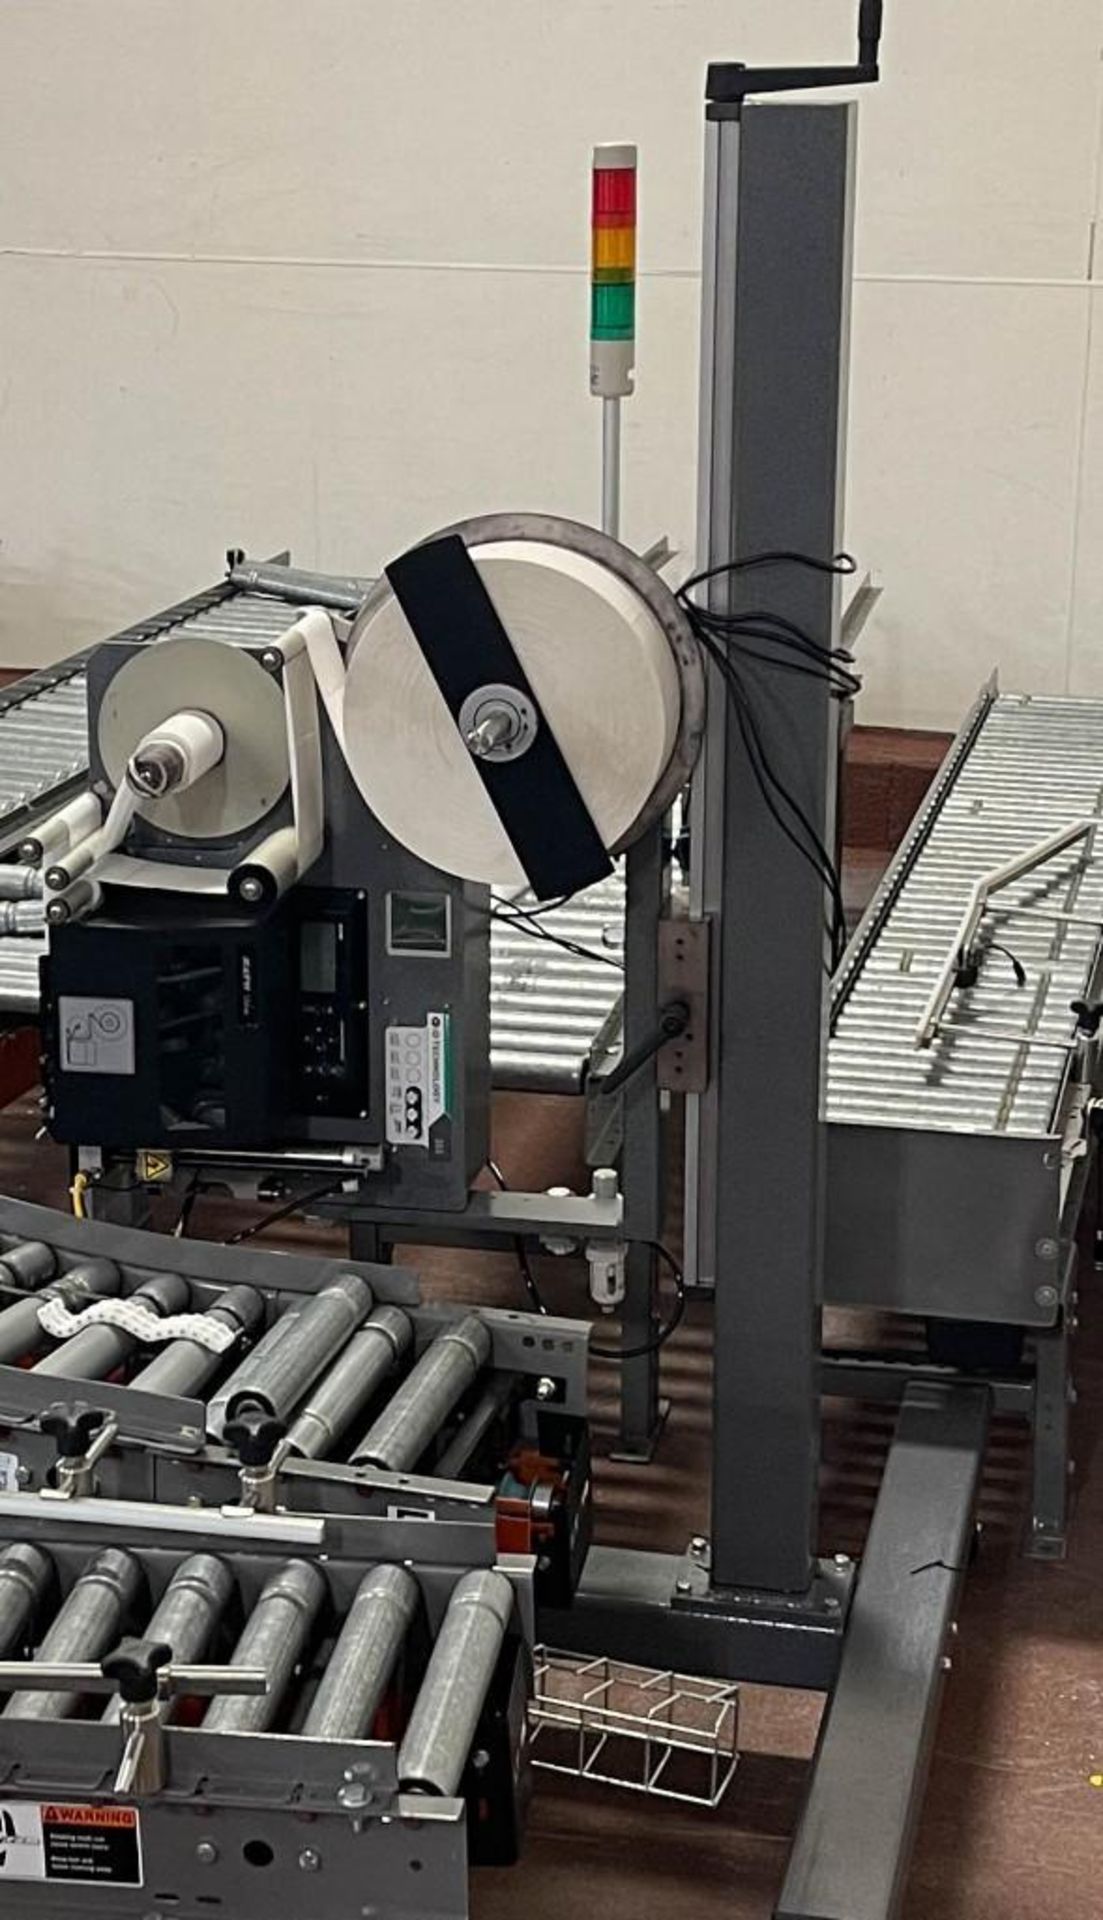 Sato Pressure Sensitive Labeler: Mounted on Portable Stand - Rigging Fee: $125